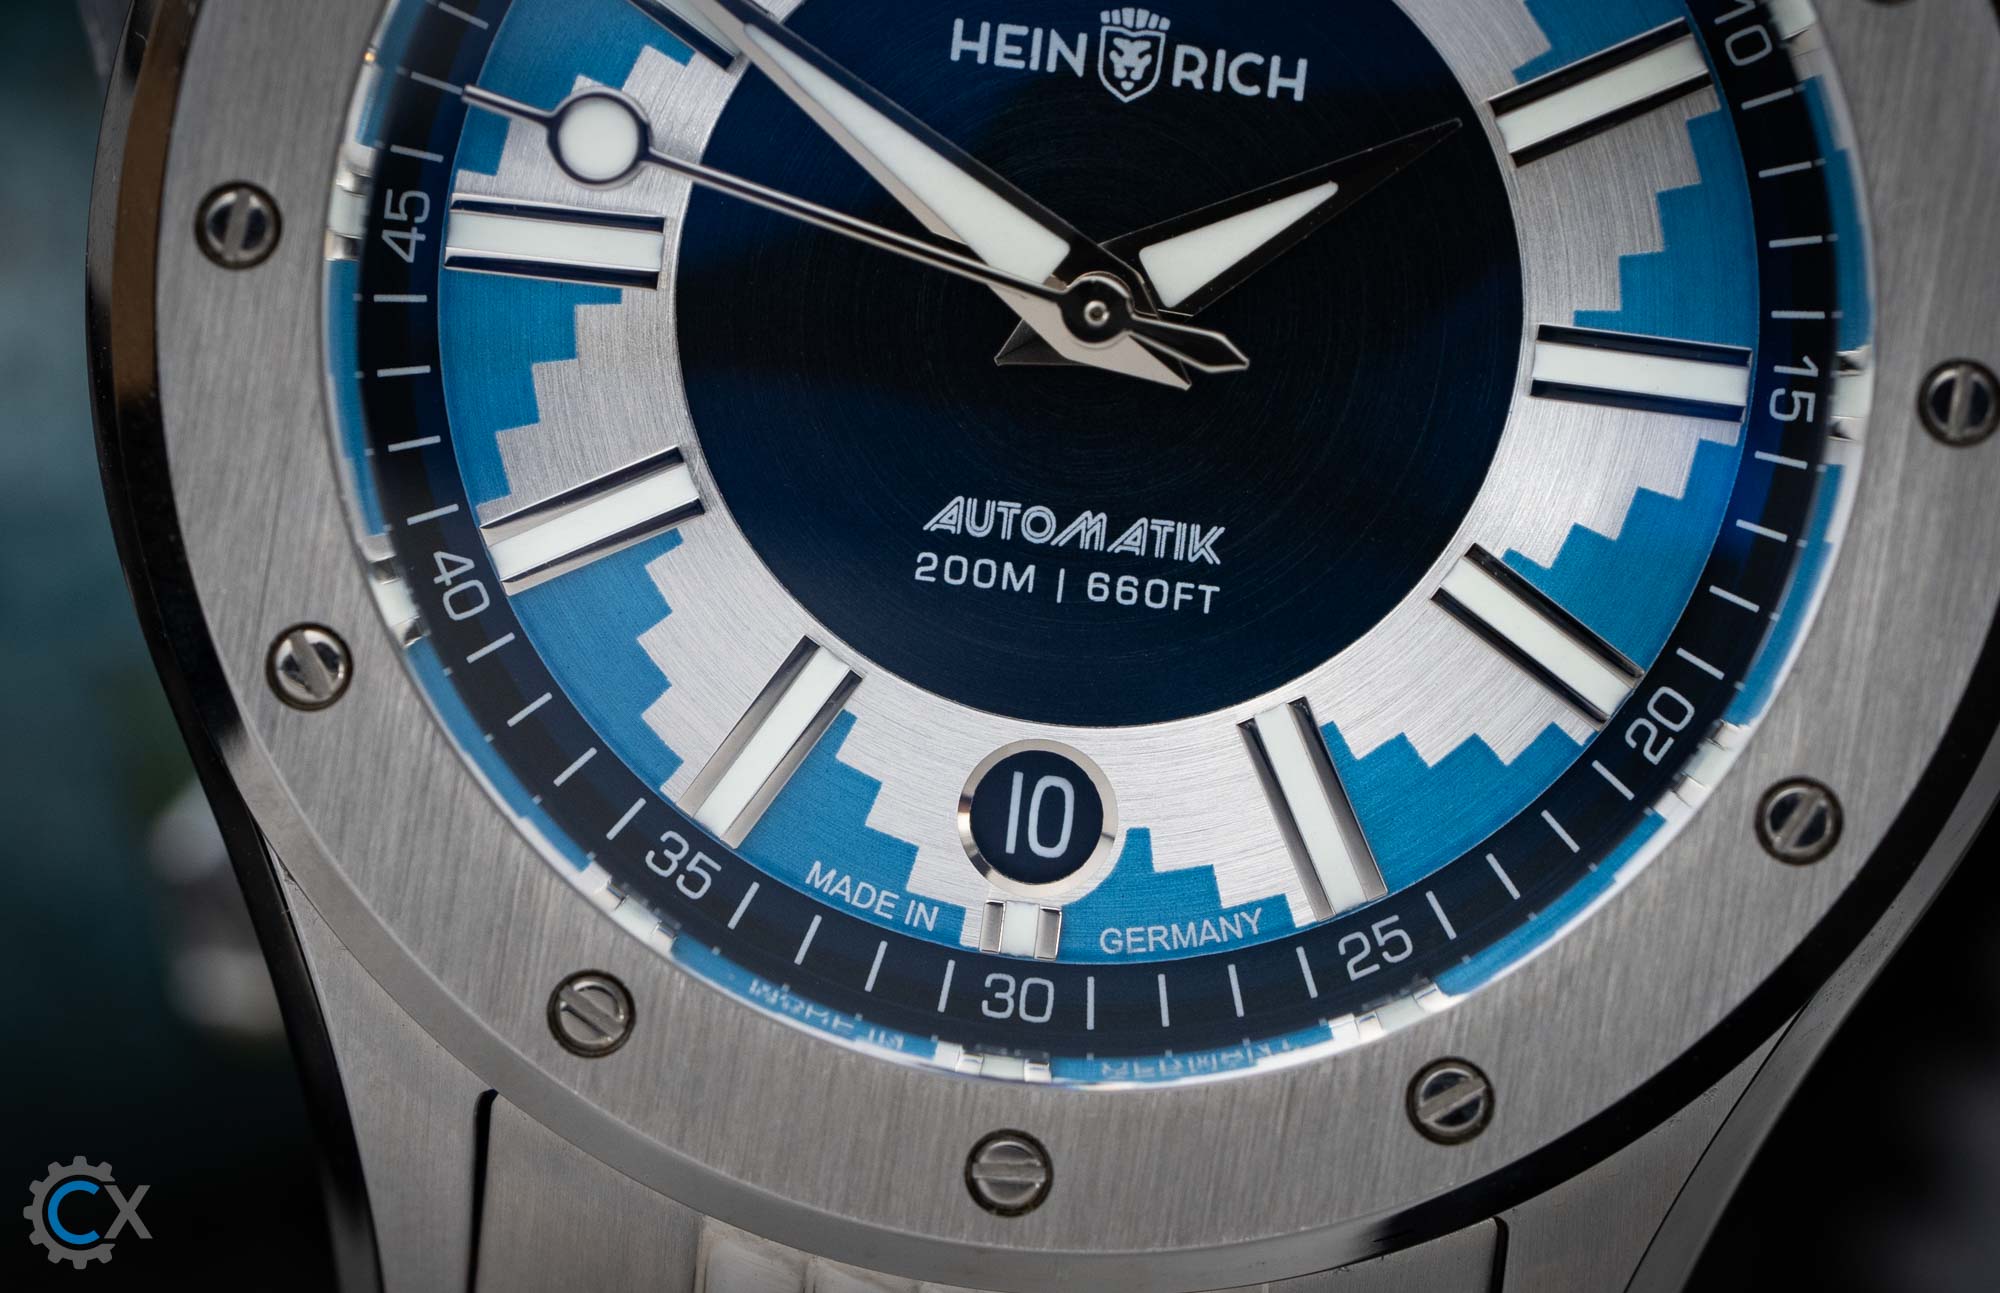 Heinrich Watch Helicoprion Buzzsaw Dial Test 2023 01347